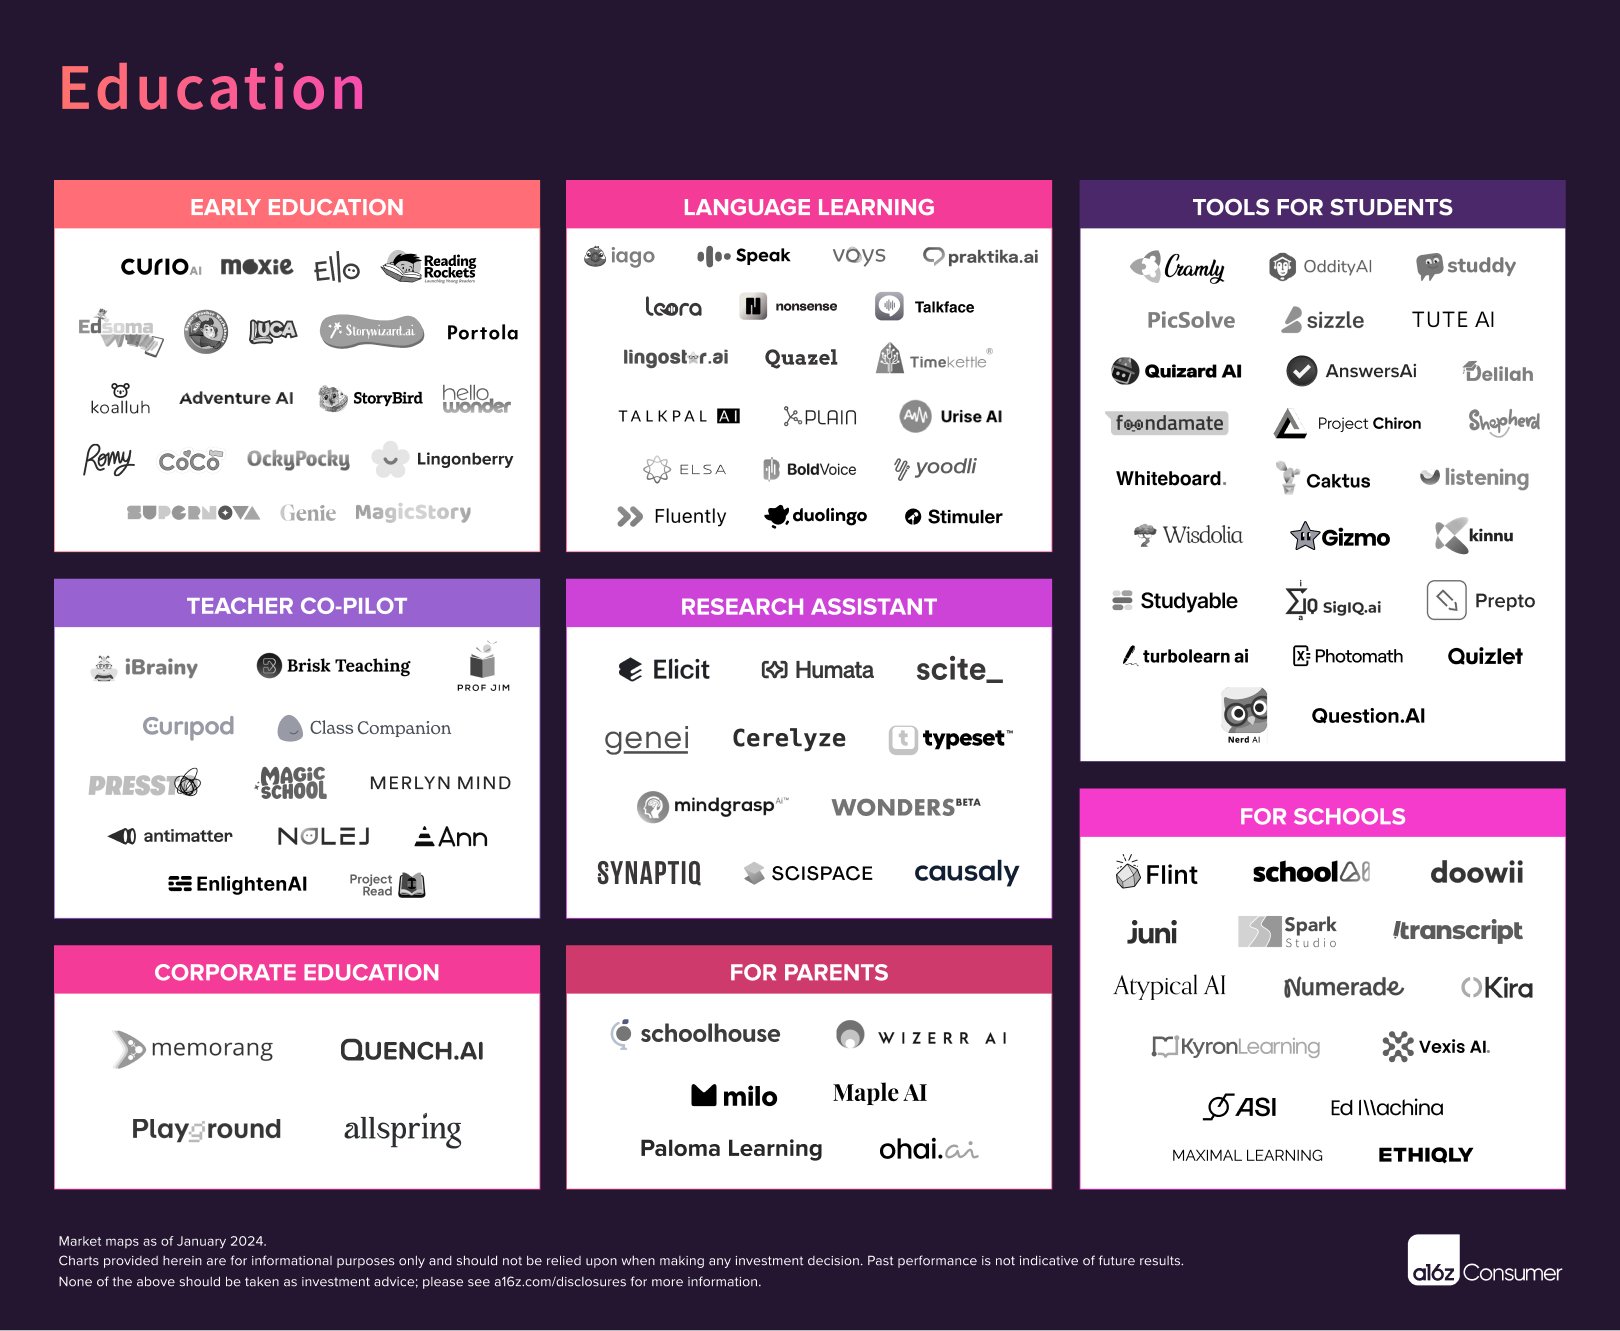 Education Market Map from A16z